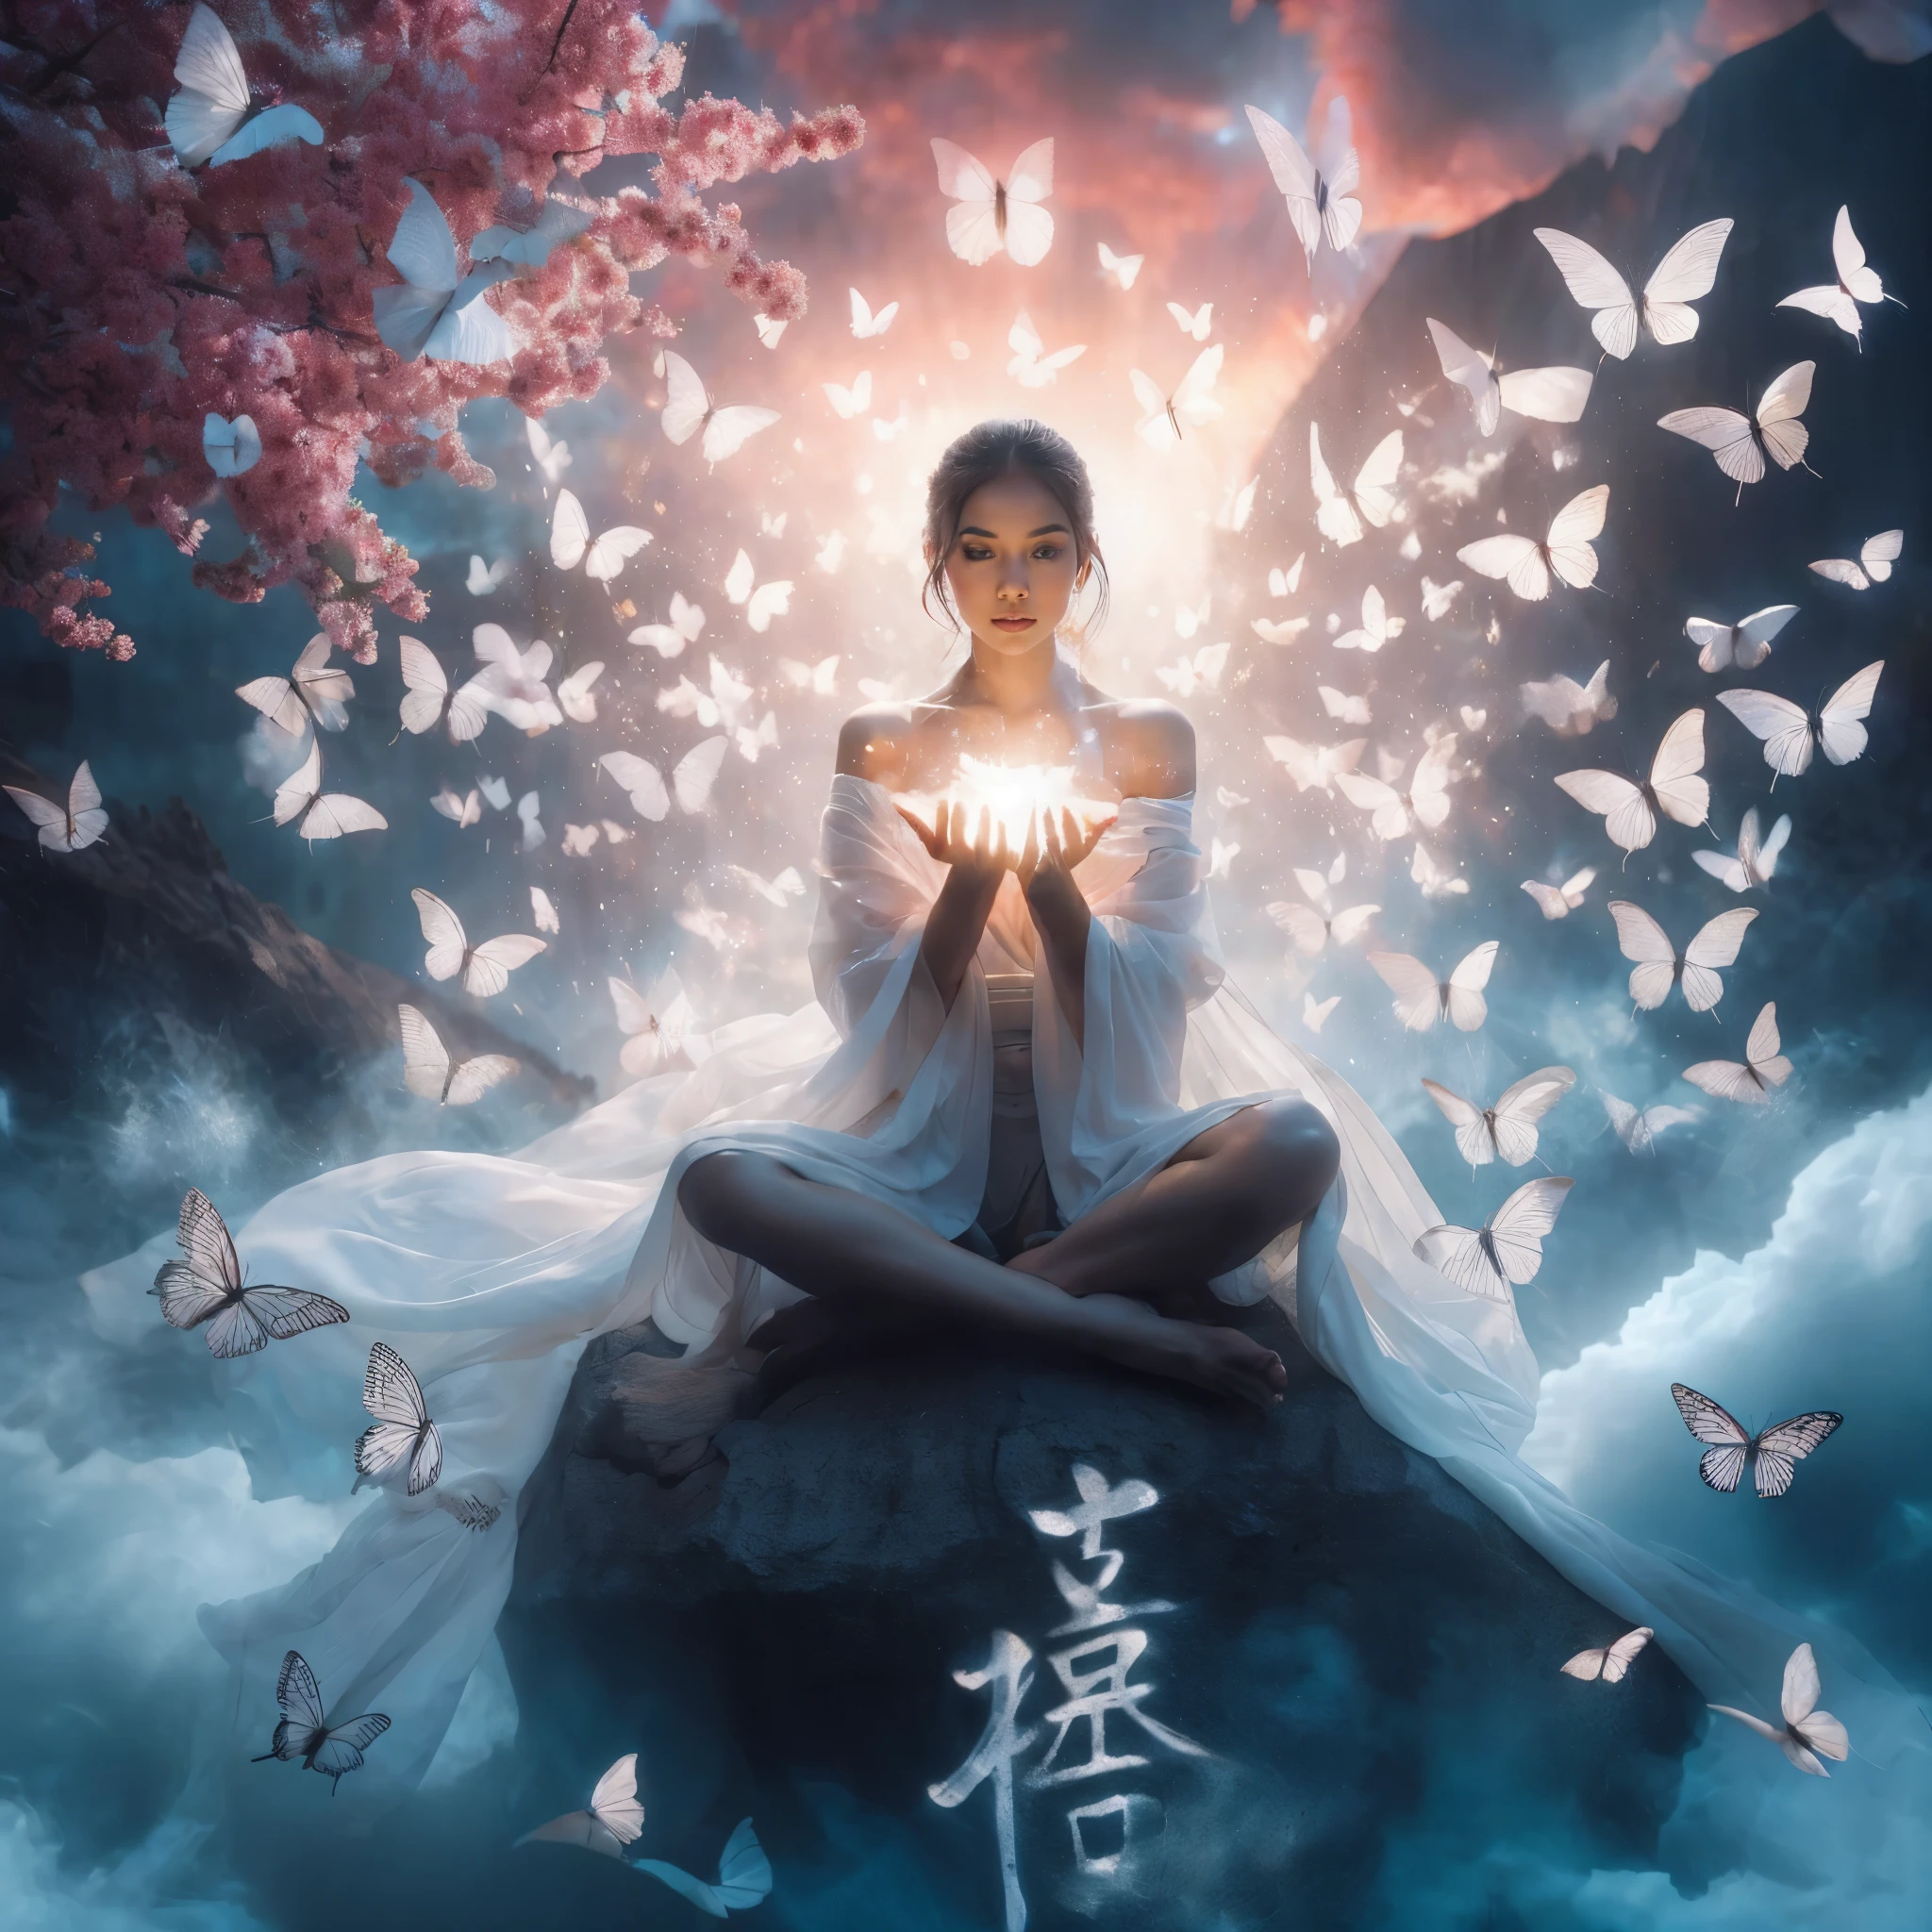 best angle shot,a beautiful female ascetic wearing a thin white kimono,flying ascetic pose floating on a rock covered with arranged white butterfly,from her hands a mystical light comes out.pink cherry blossoms,magical Japanese calligraphy kanji writing that glows orange and floats in the air.face glowing,Dramatic blue smoke effect.setting is a large and magnificent room,stalactite walls,water on the floor,a large hole above.lighting focus on the face,details on facial skin.